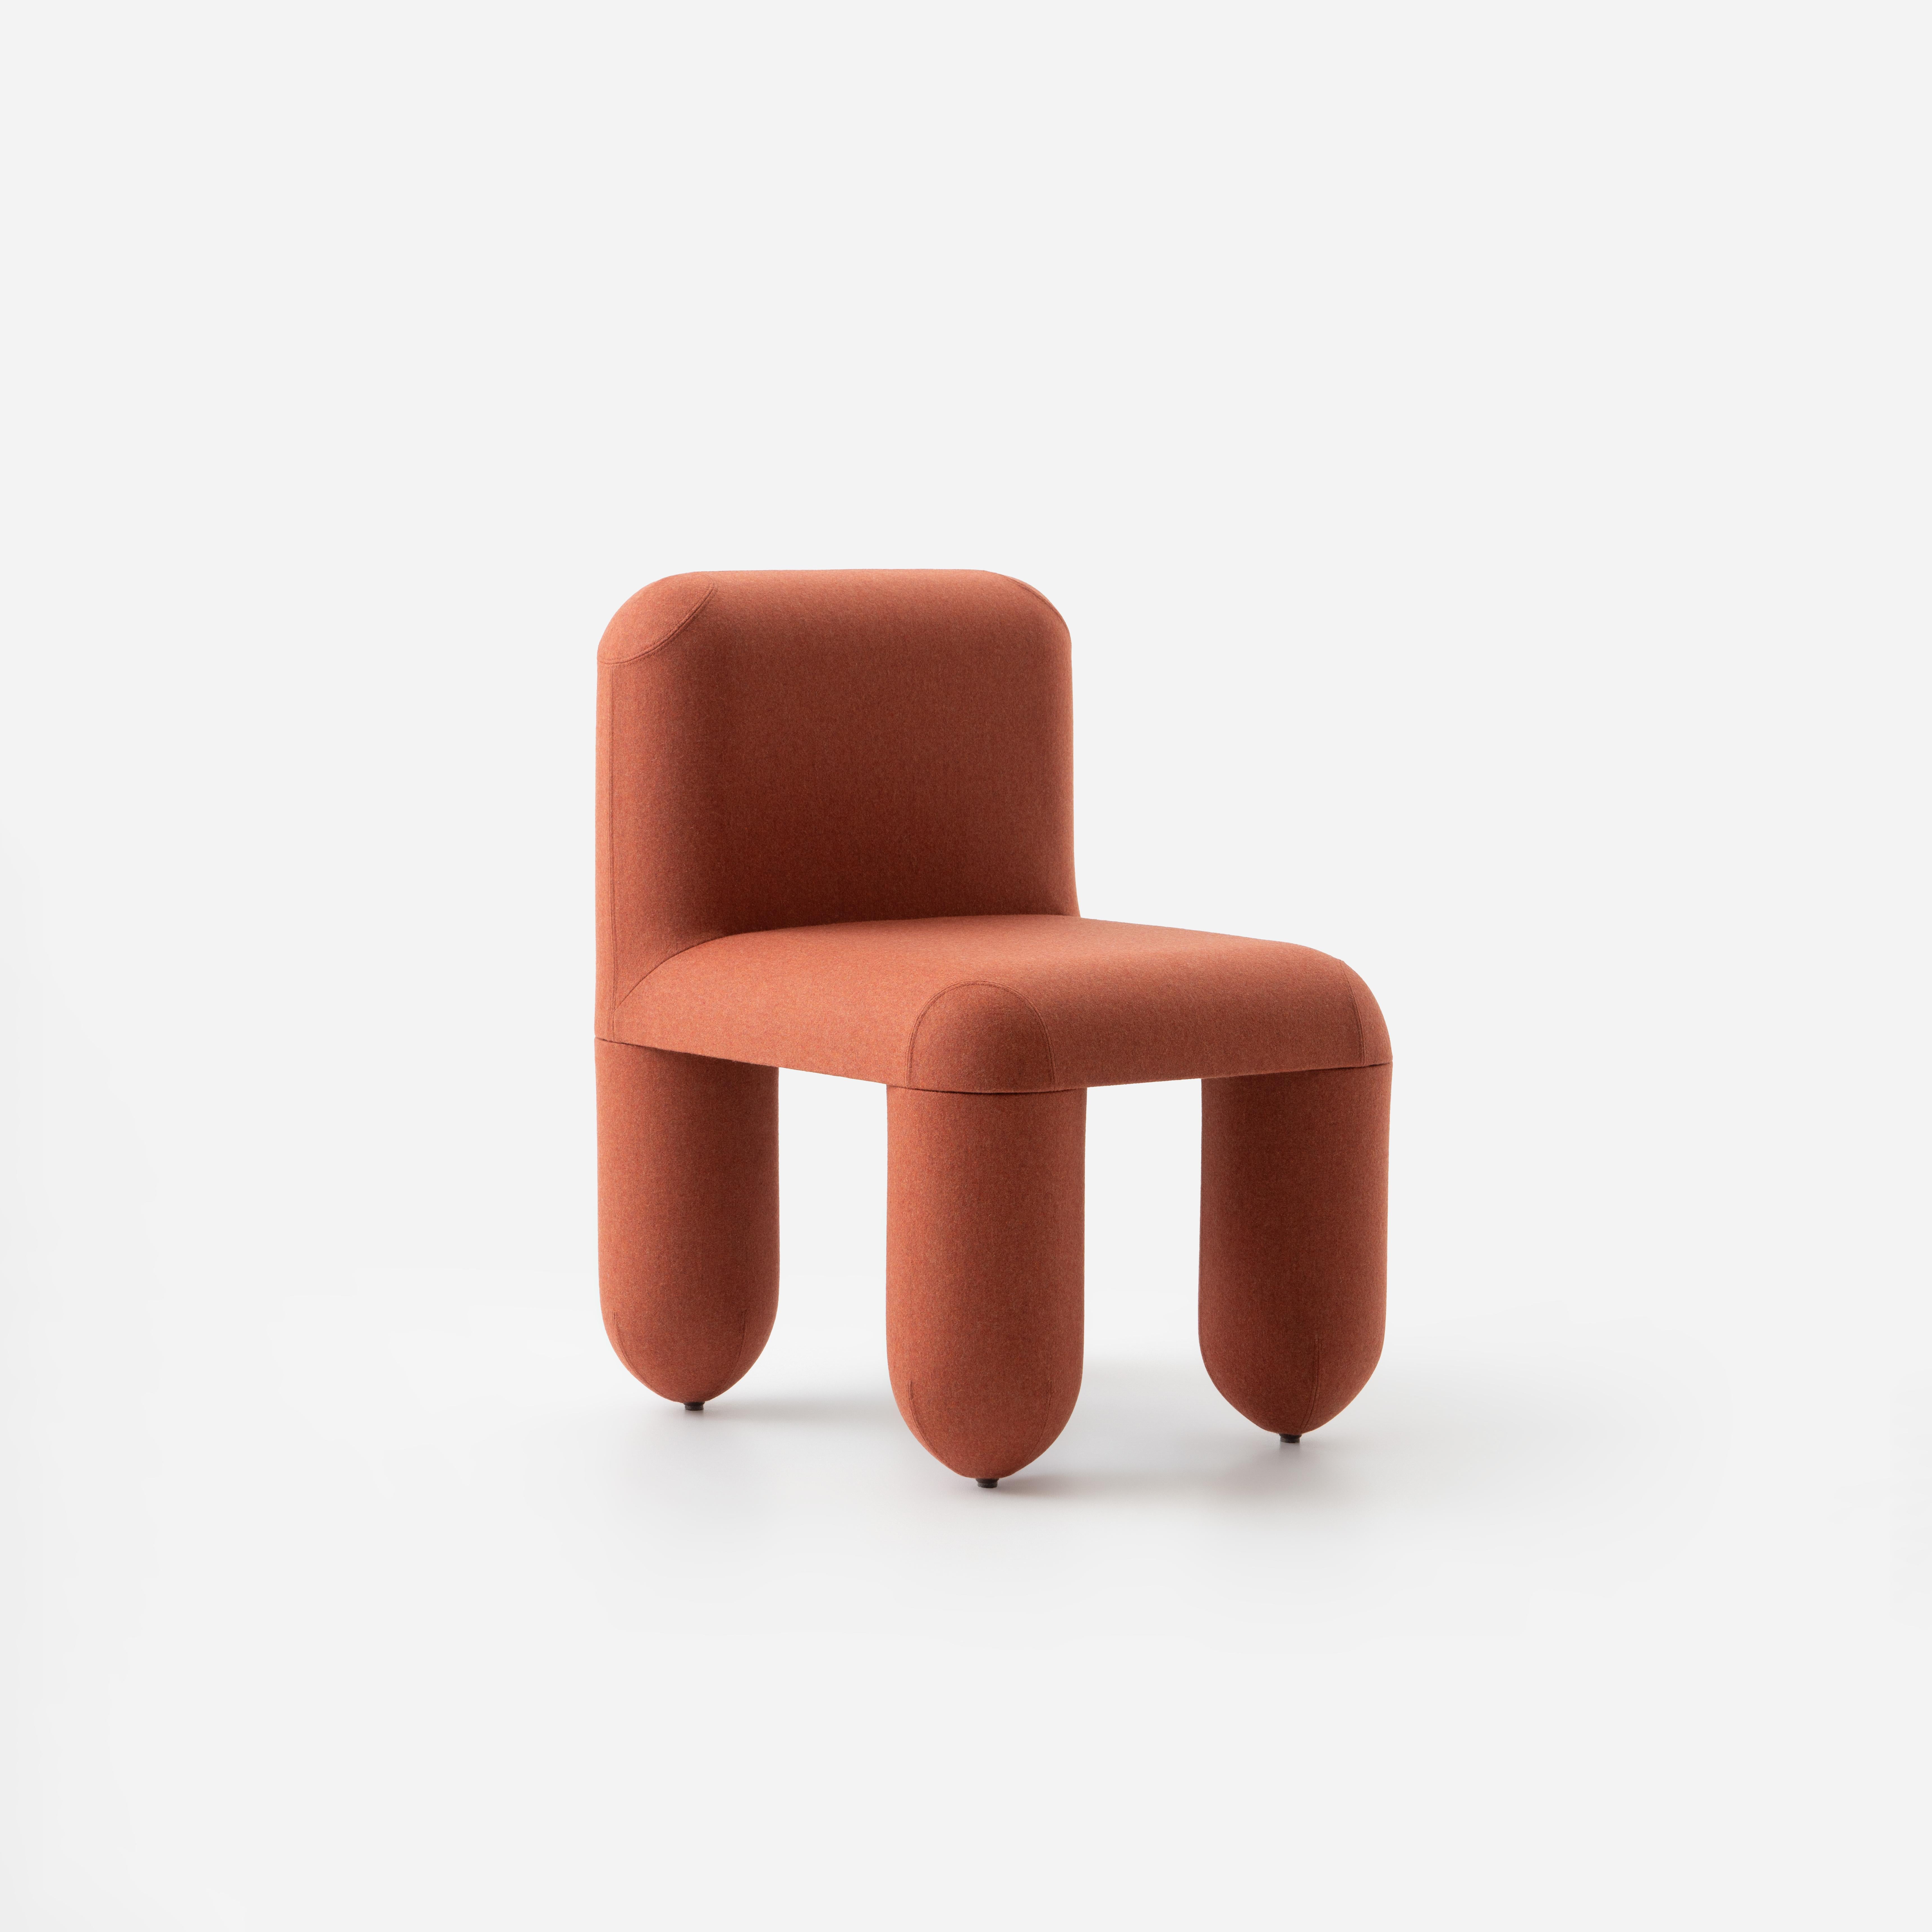 Contemporary Dining Chair 'Hello' by Denys Sokolov x Noom, Orange For Sale 2